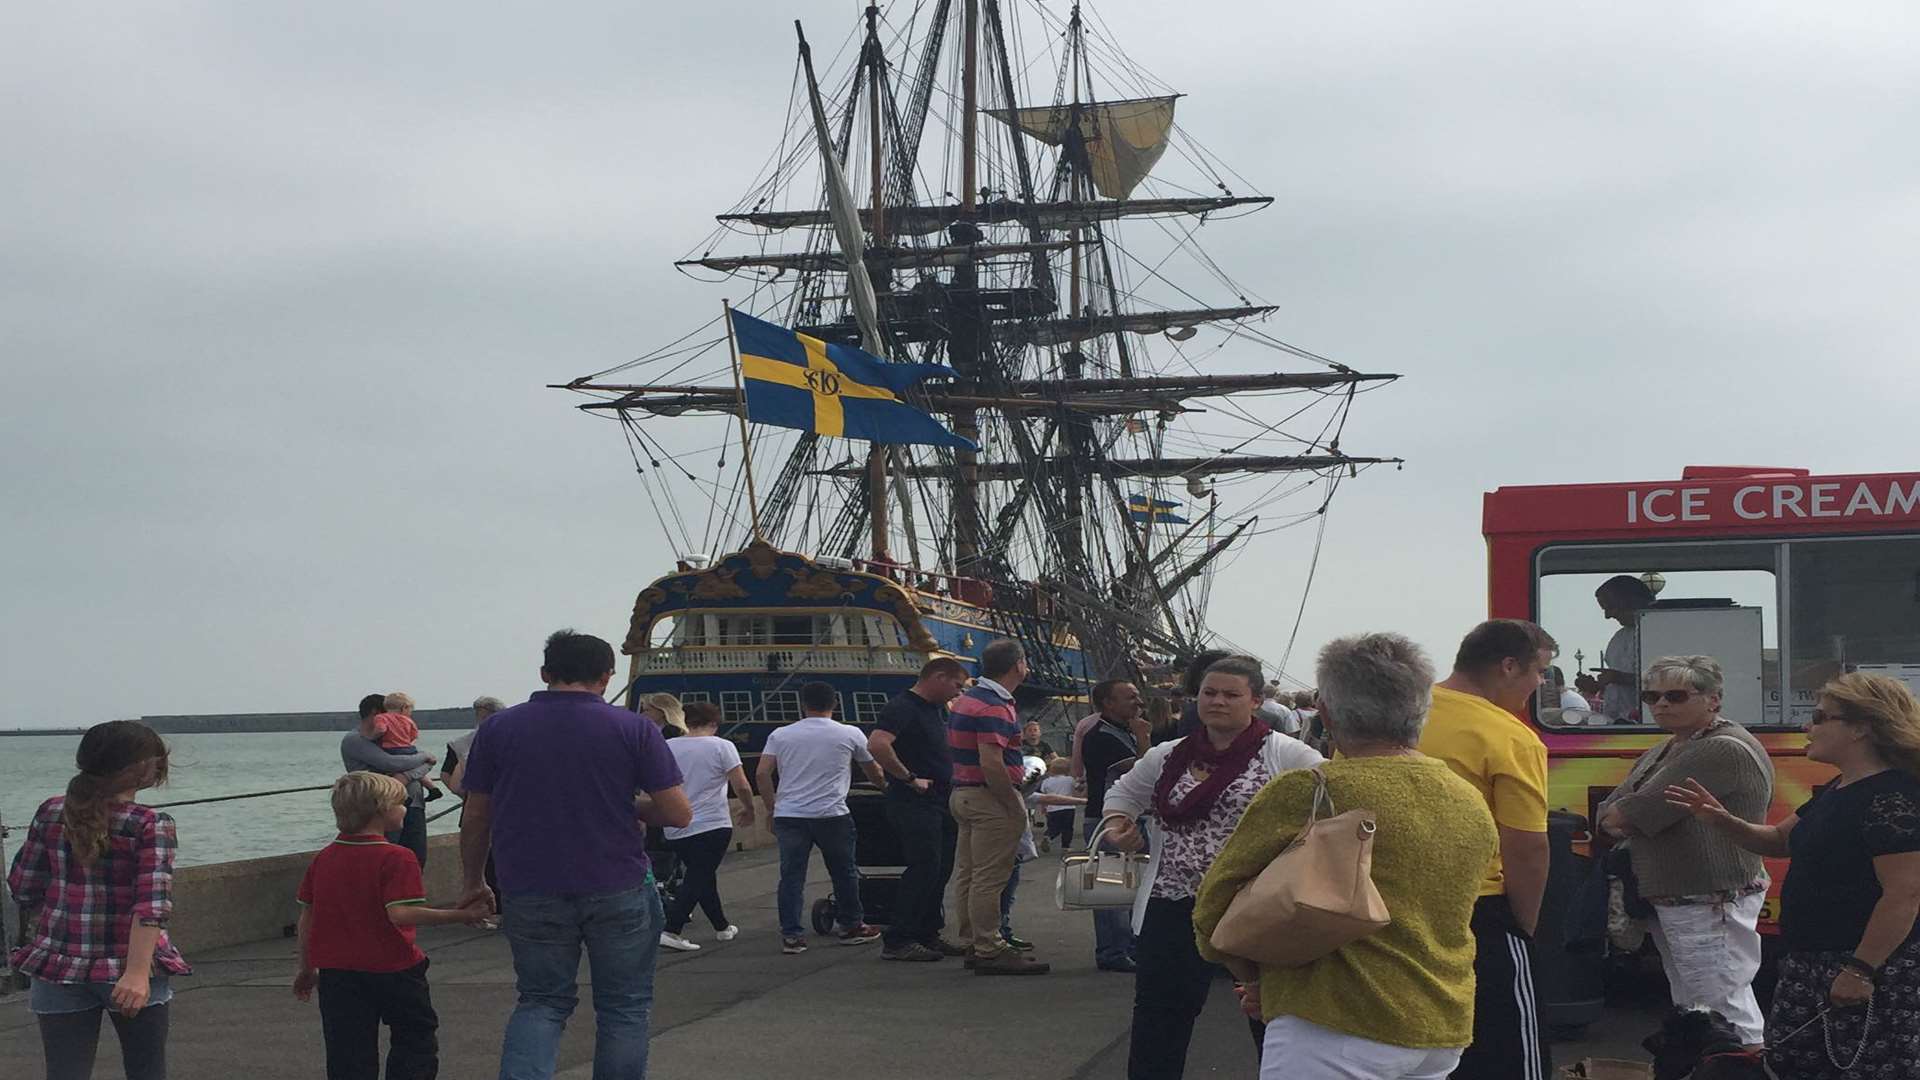 Crowds flocked to see the replica Gotheborg